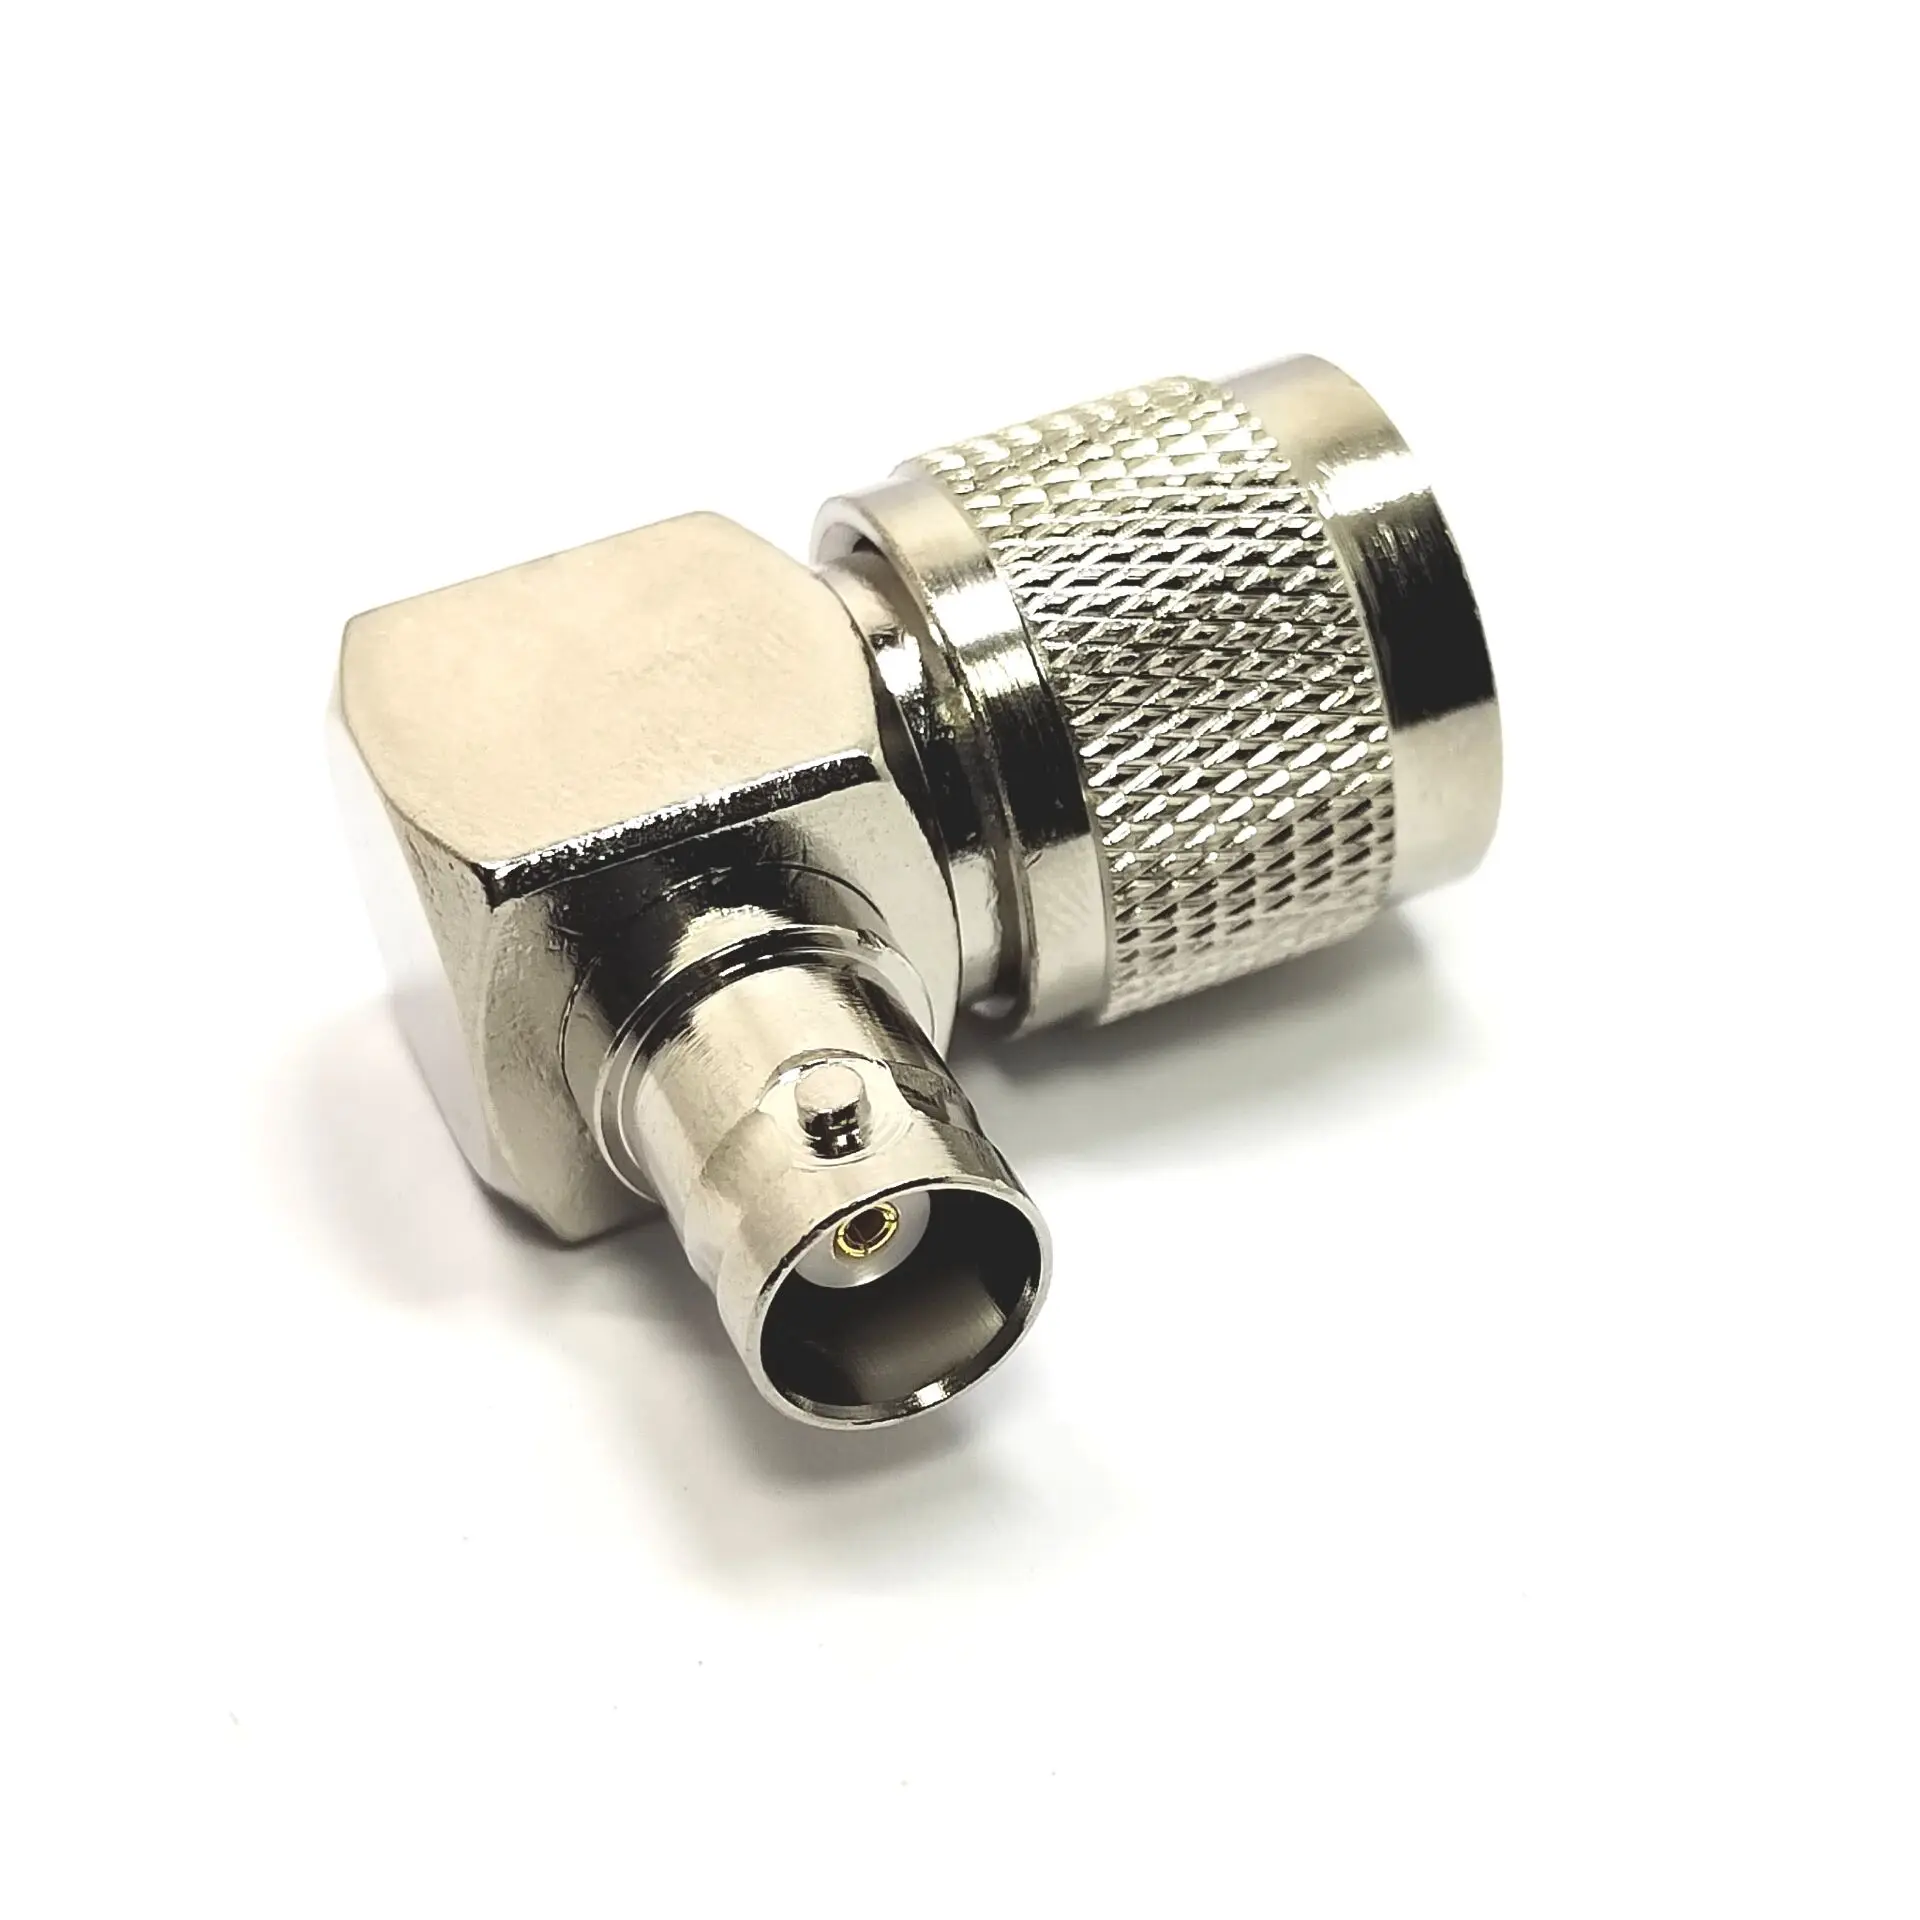 Nickel plated Rf Connector BNC Female To UHF PL259 Male Right Angle Adapter in stock supplier